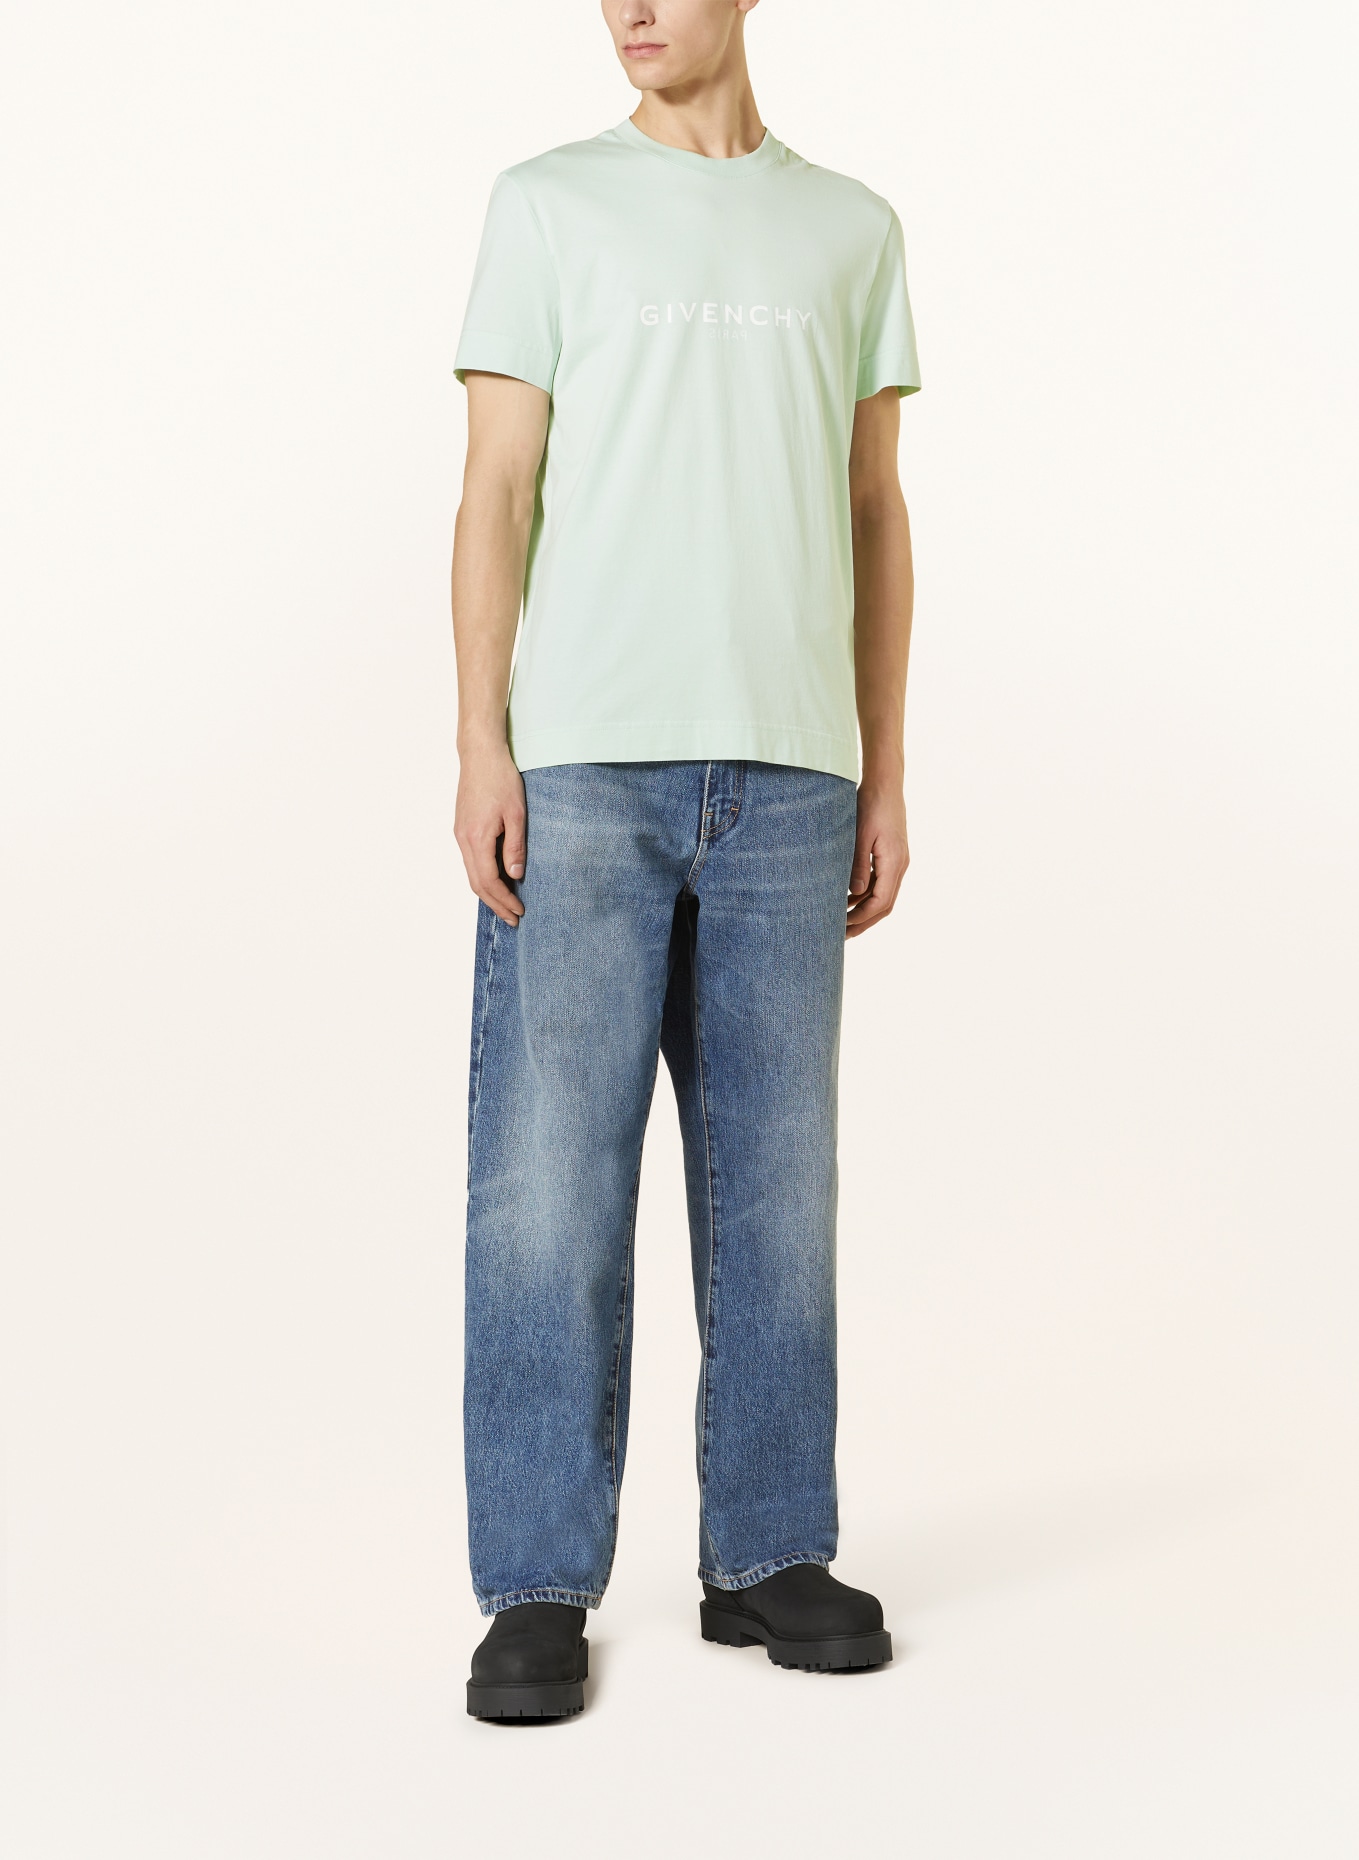 GIVENCHY T-shirt, Color: TURQUOISE (Image 2)